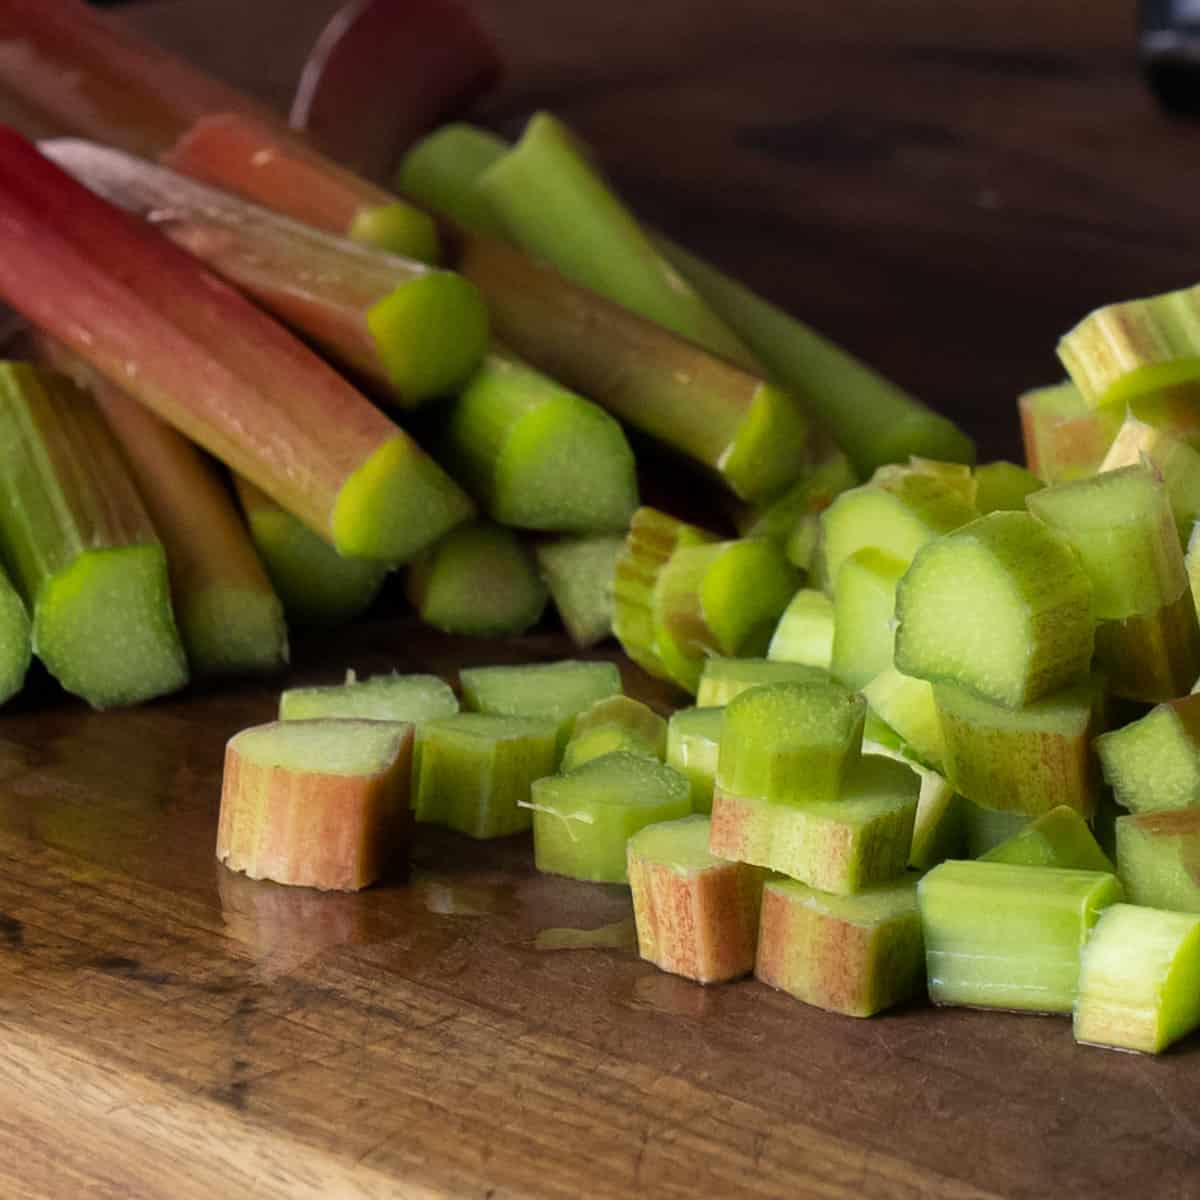 Rhubarb stalks on a cutting board with a piled of chopped pieces.